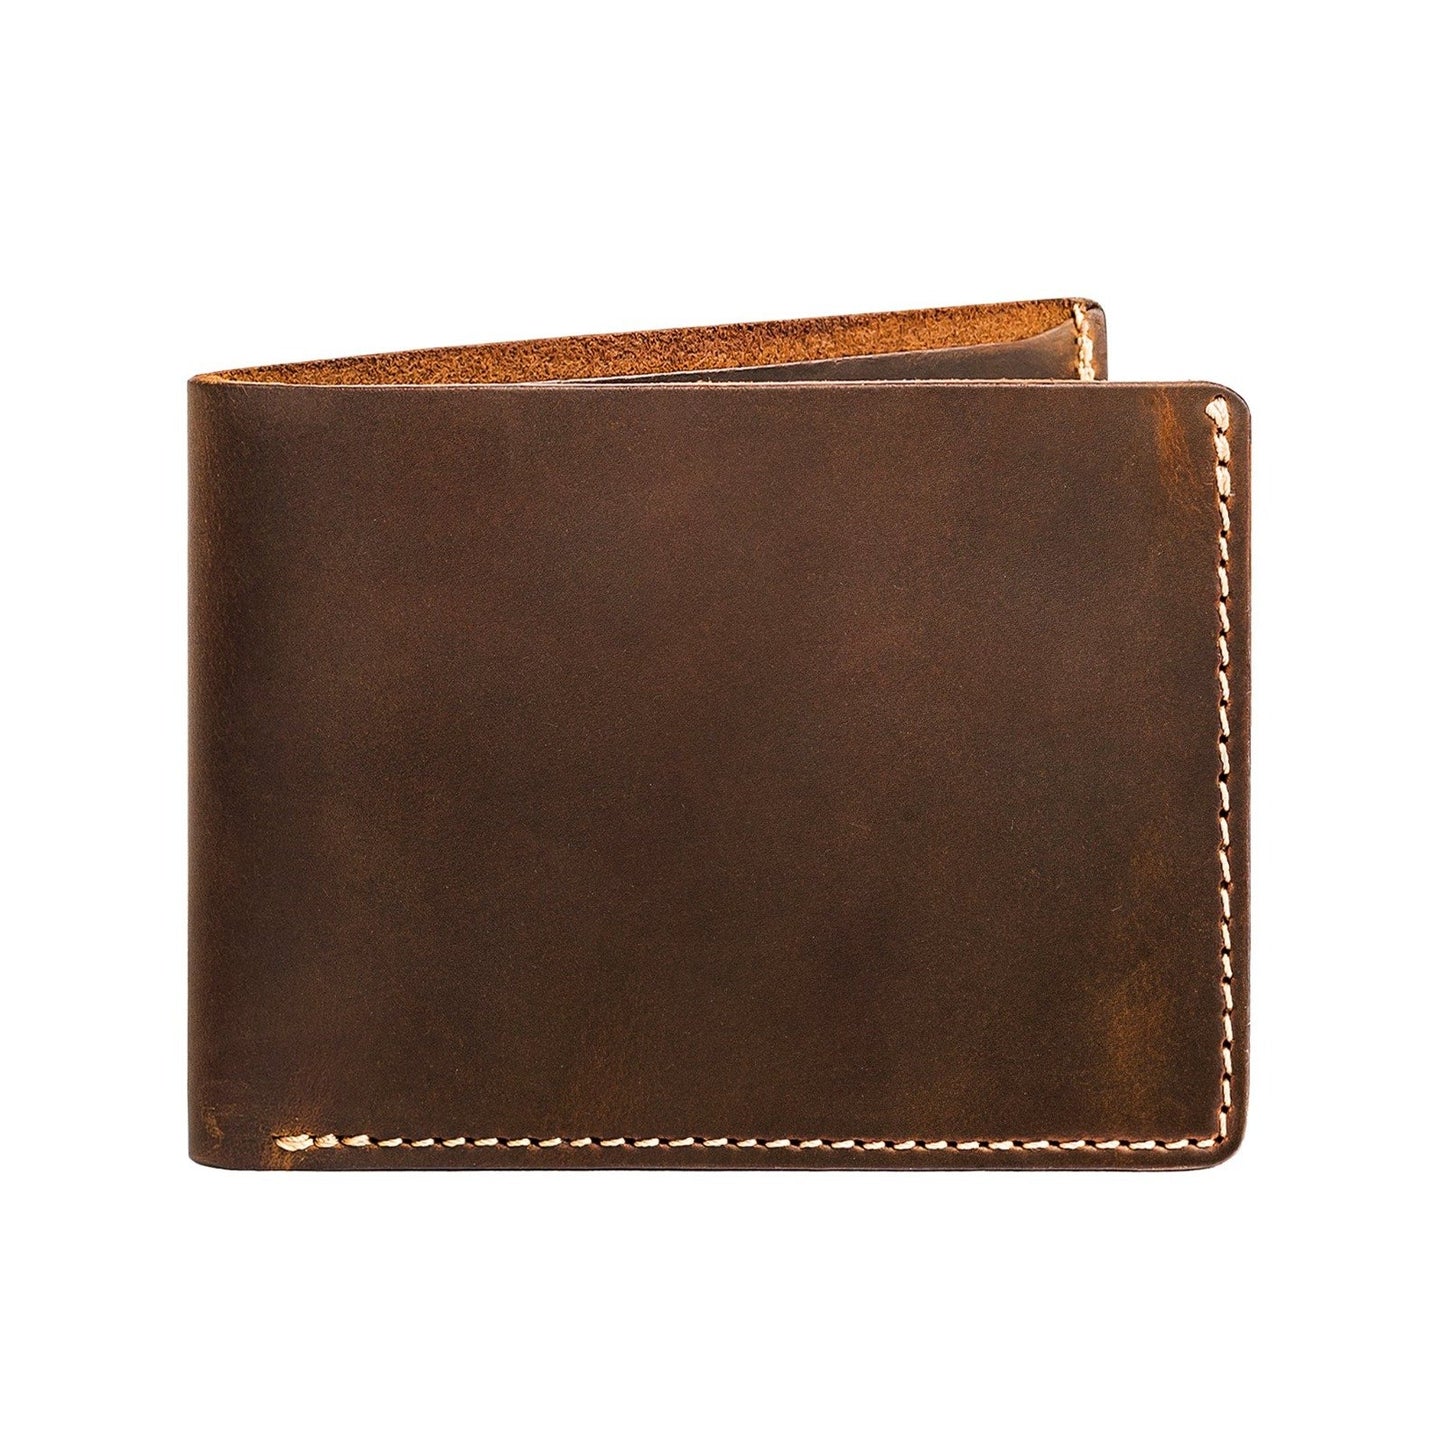 Tested: The 10 Best Men's Wallets in 2023